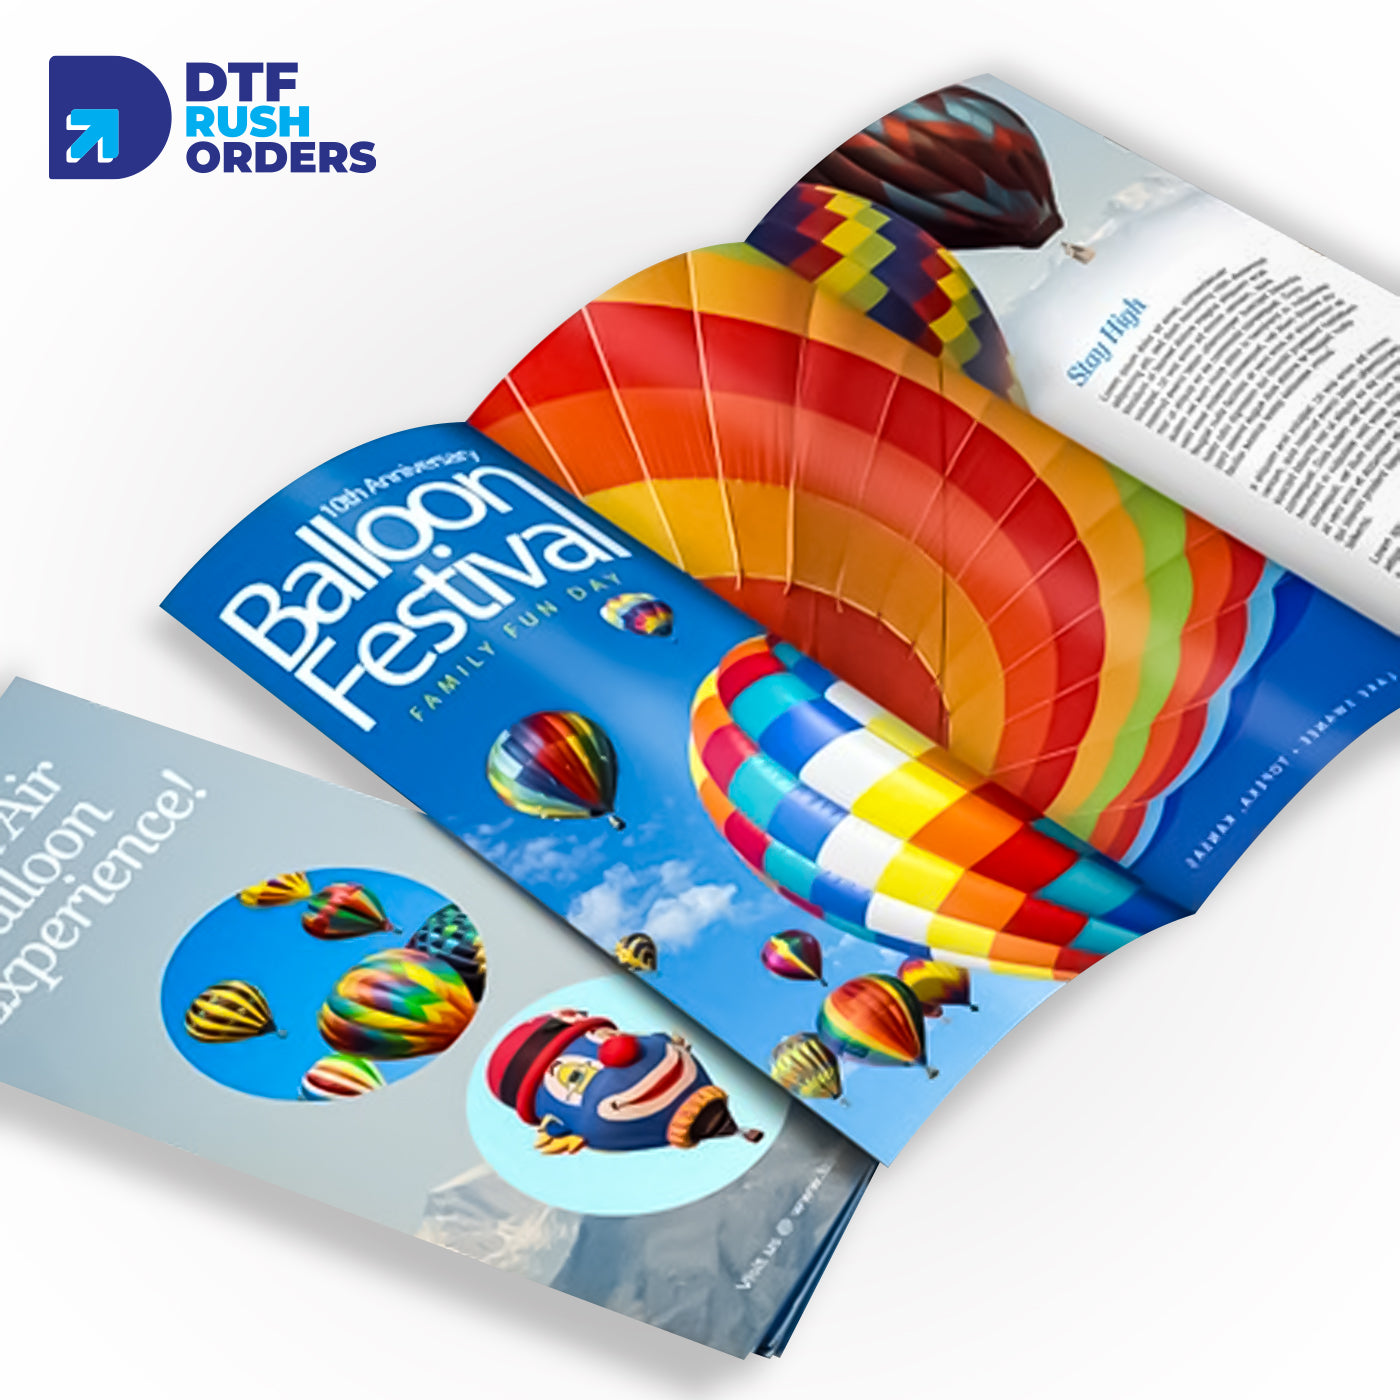 Cheap wholesale mr.print brochures with DTF Rush Orders